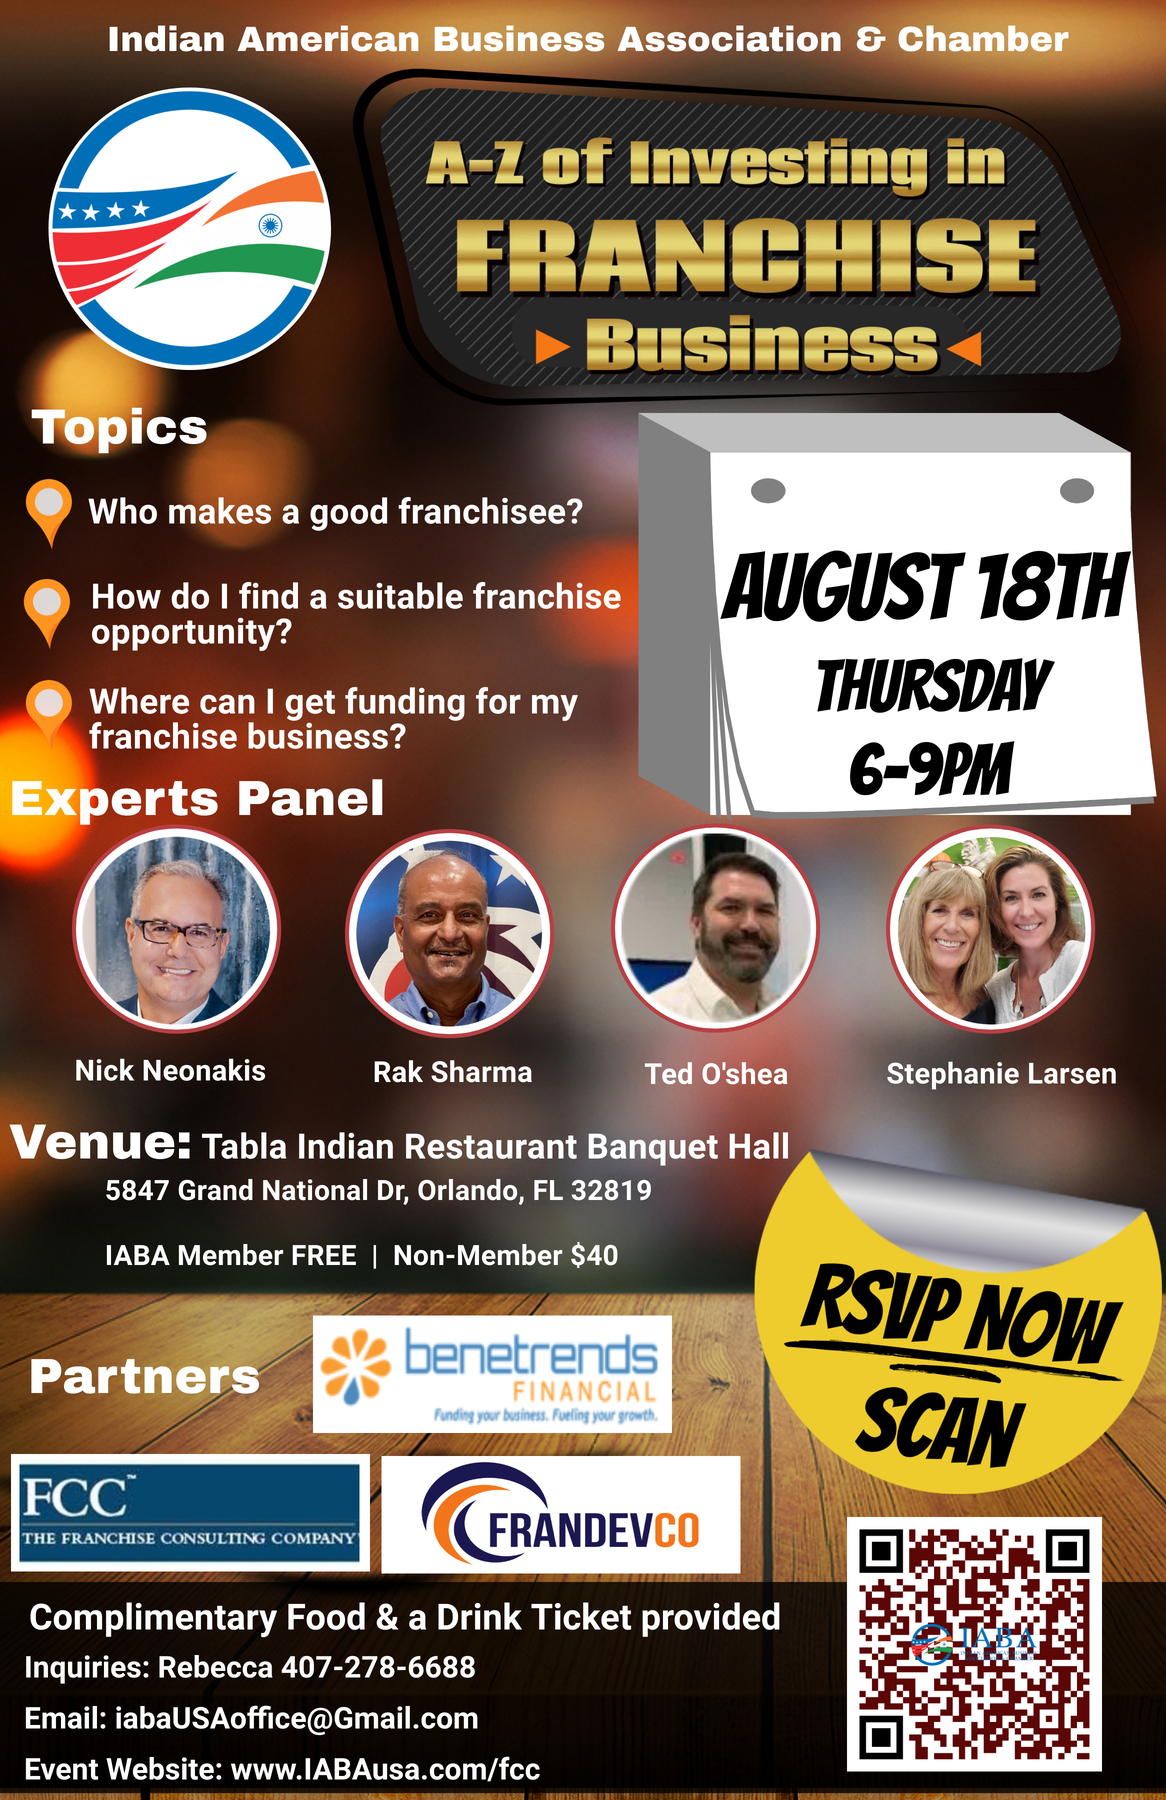 IABA Franchise Experts Panel & Opportunities